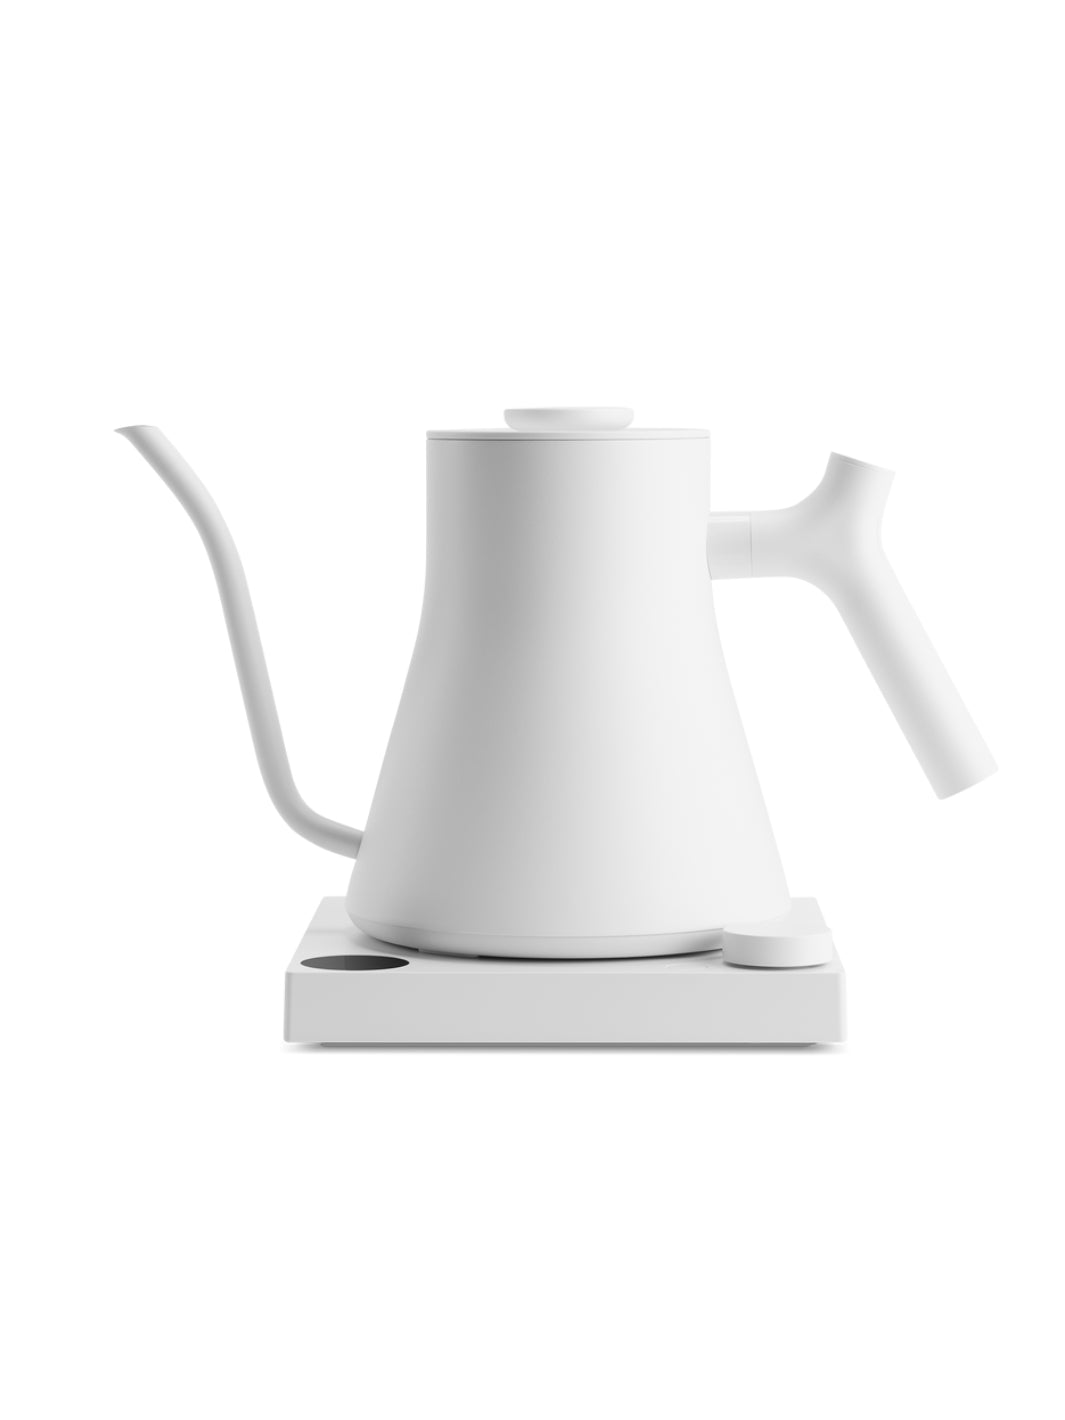 Fellow Stagg EKG Electric Pour-over Kettle - Polished Silver $195